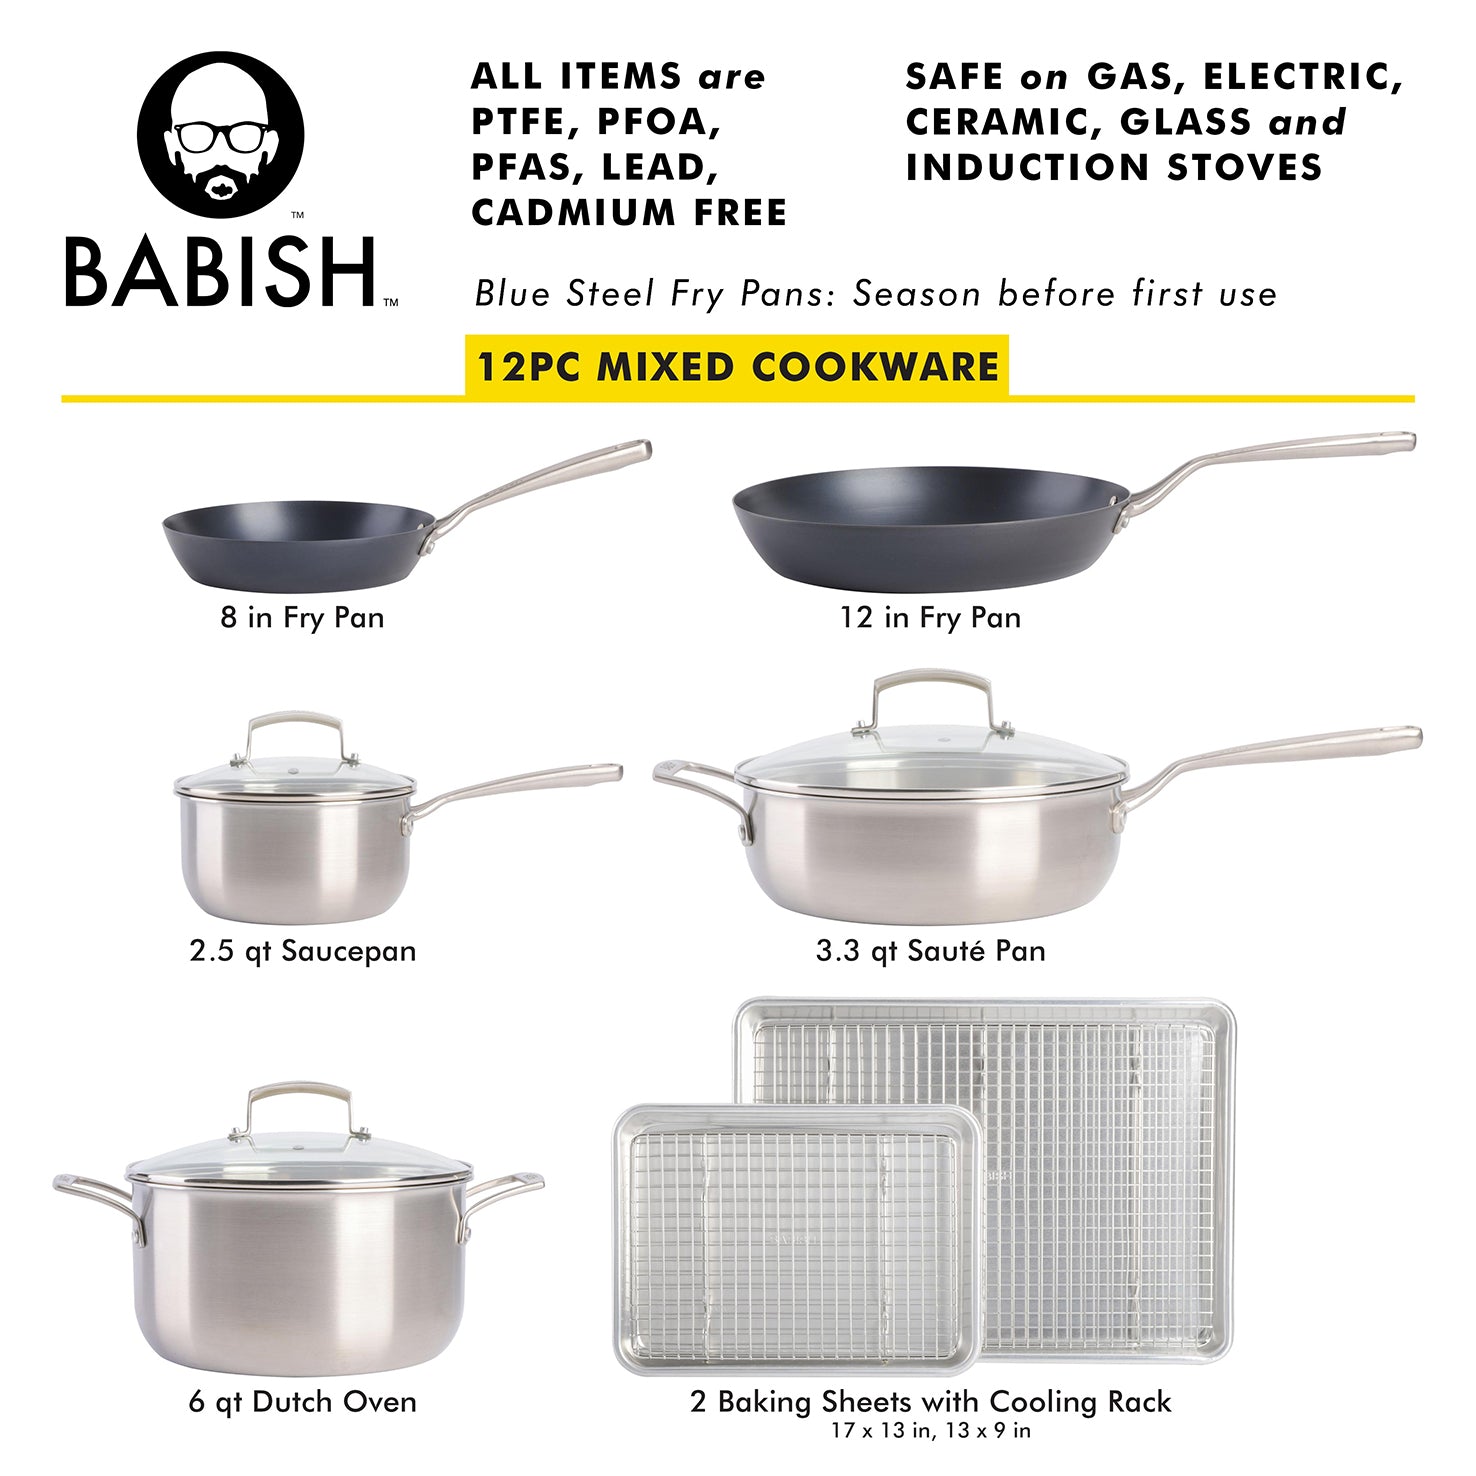 Babish 12-Piece Mixed Material (Stainless Steel, Carbon Steel, & Aluminum) Professional Grade Cookware Set W/ Baking Sheets